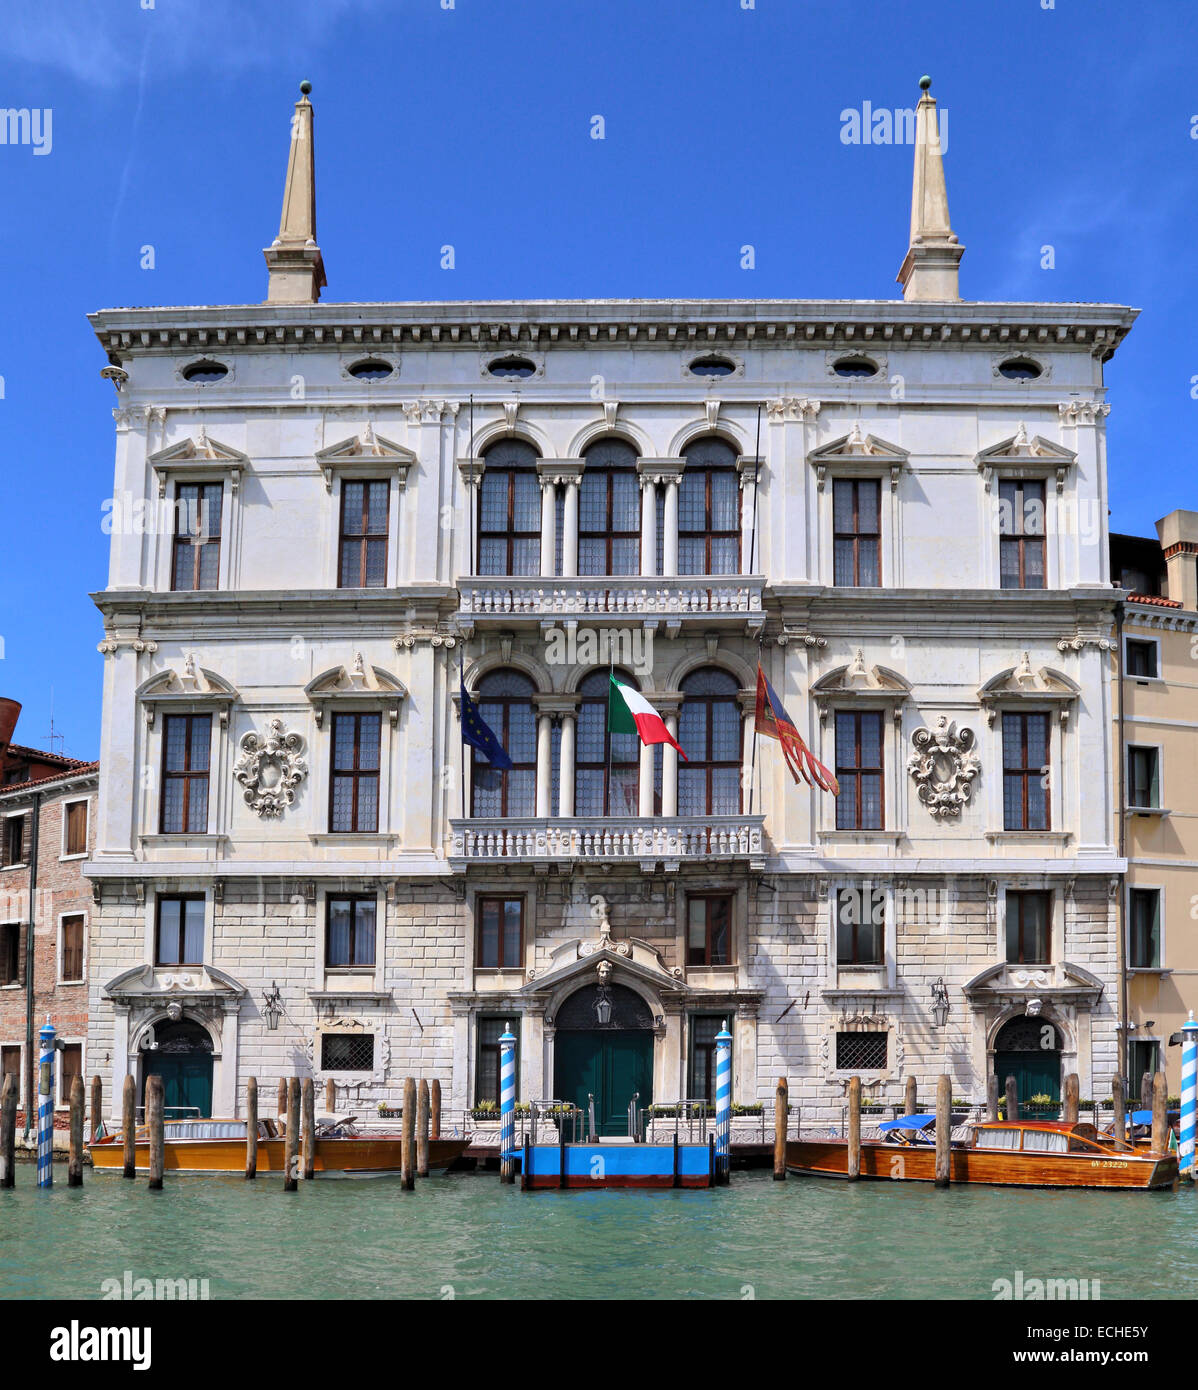 Palazzo balbi palace hi-res stock photography and images - Alamy